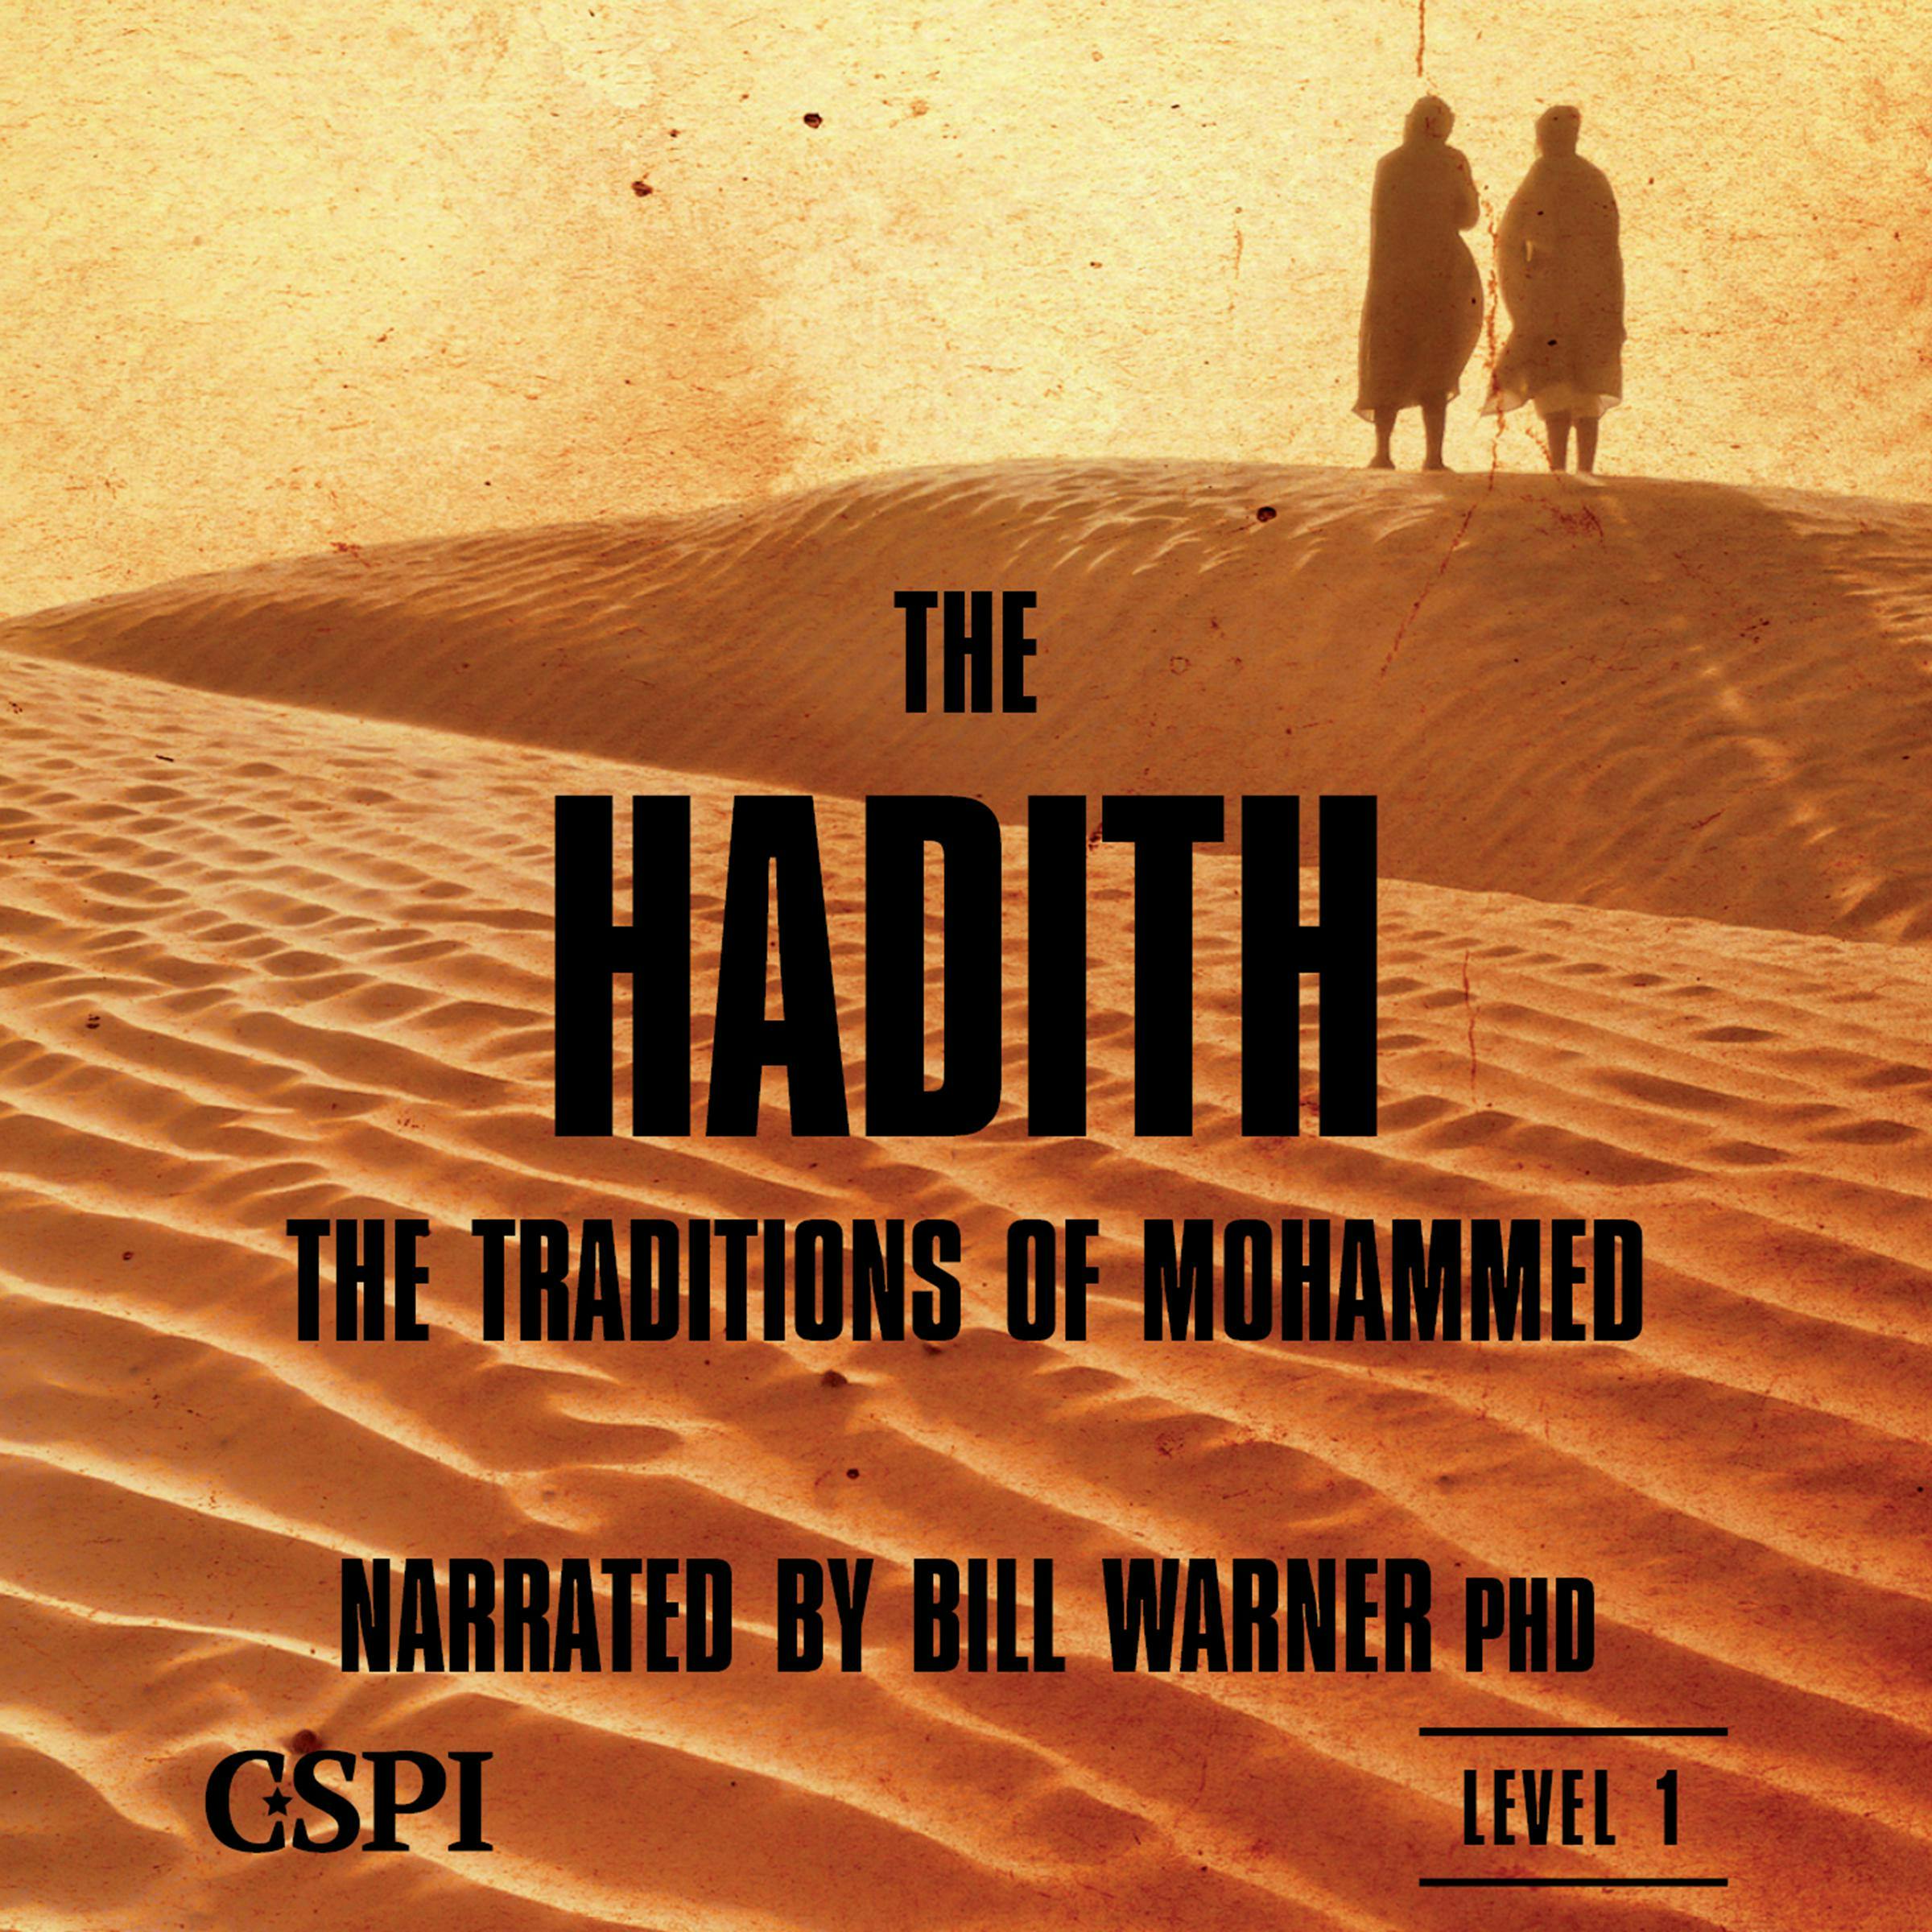 The Hadith: The Traditions of Mohammed - PhD